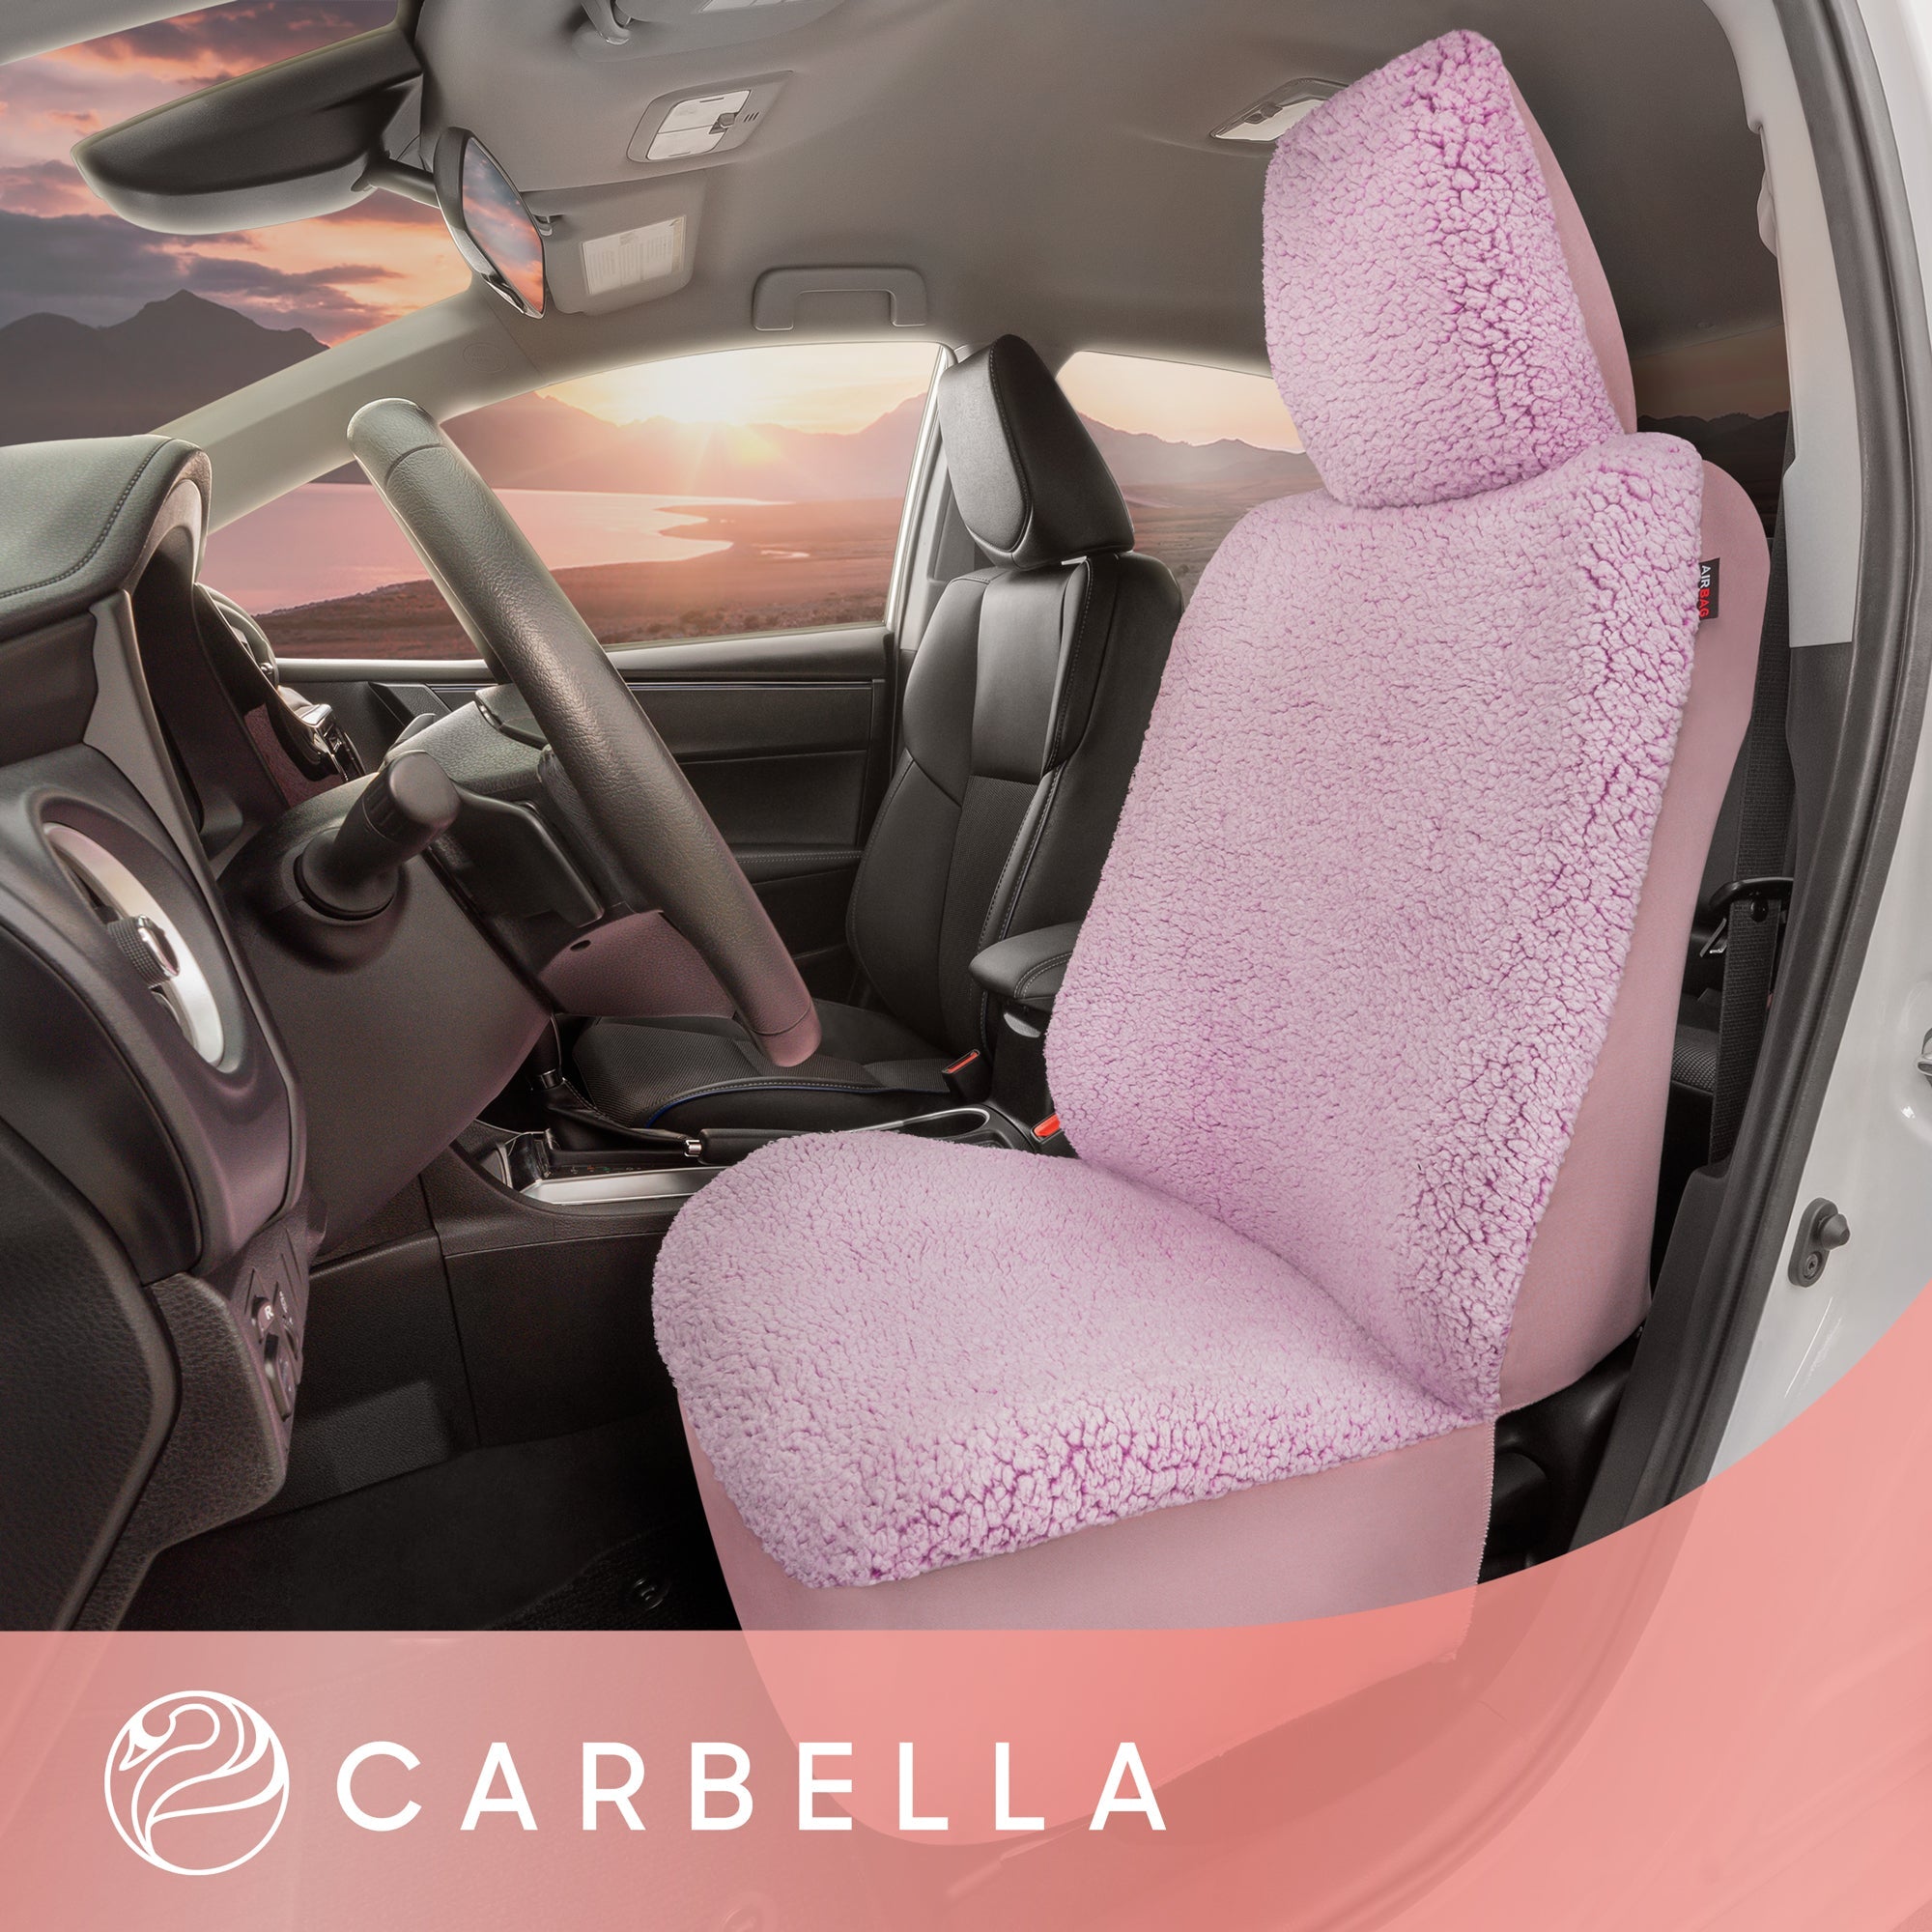 Carbella Plush Sherpa Fleece Car Seat Cover, 1 Piece Pink Seat Cover for Cars with Soft Cushioned Touch, Cute Automotive Interior Protector for Trucks Van SUV, Car Accessories for Women - Pink:#e0acd0